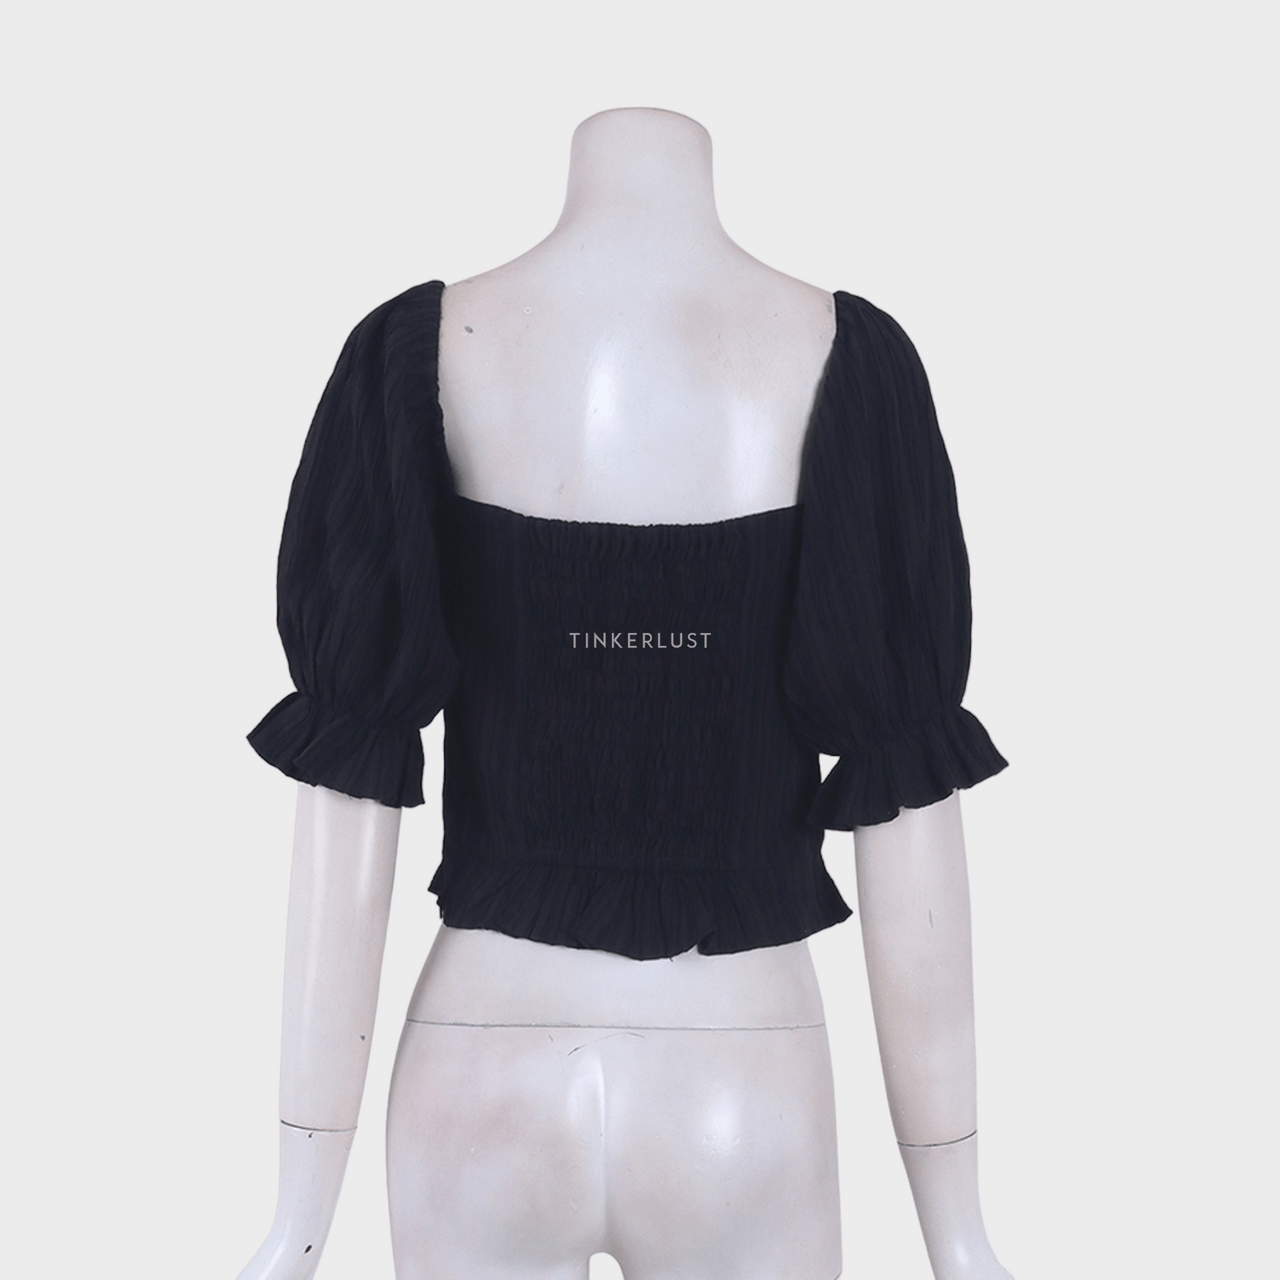 With Love X Stella Lee Black Blouse